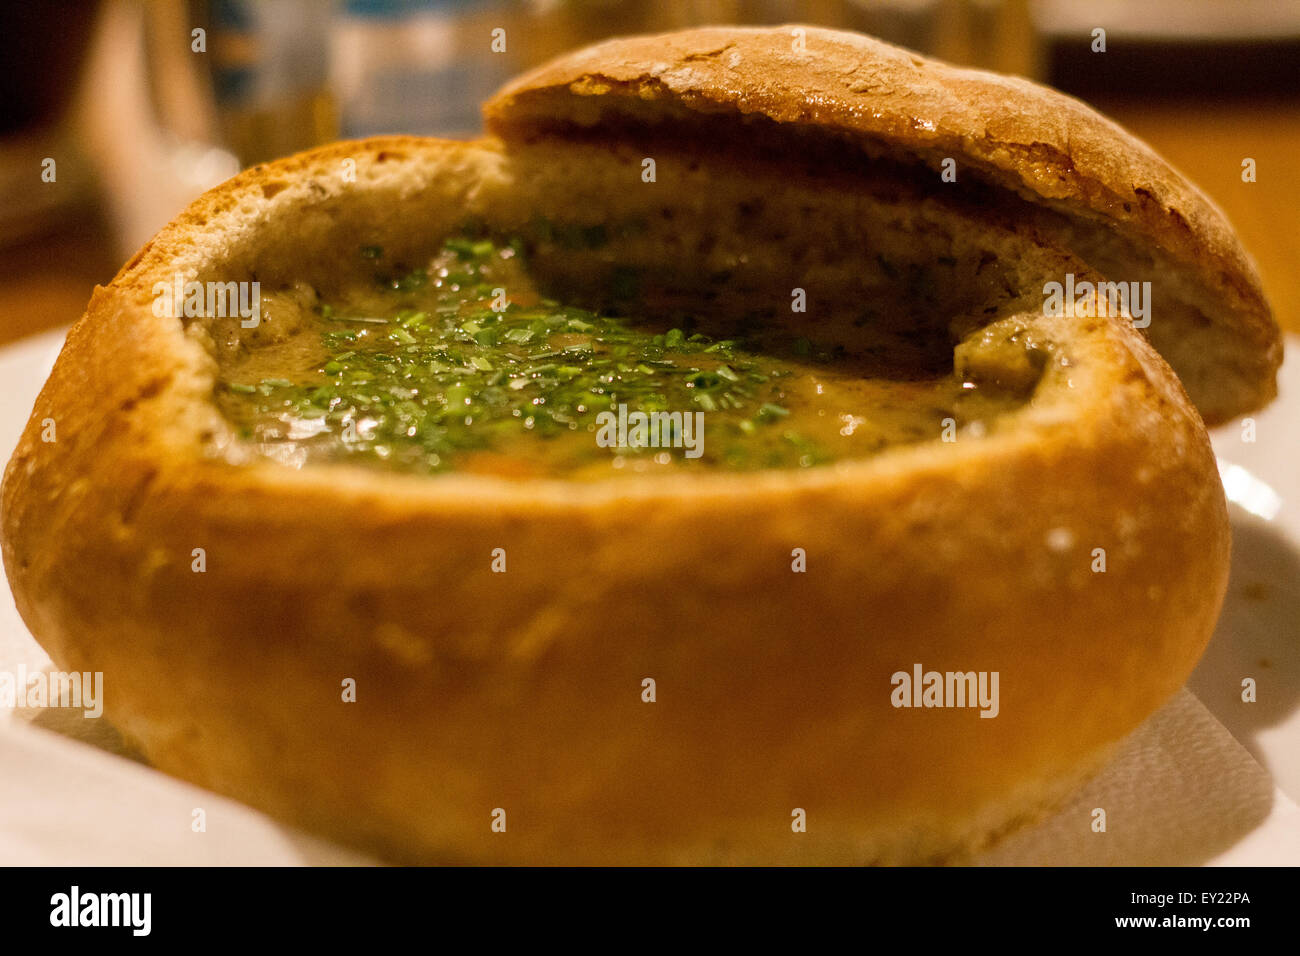 Soup served in a bread bowl, typical Czech plate Stock Photo